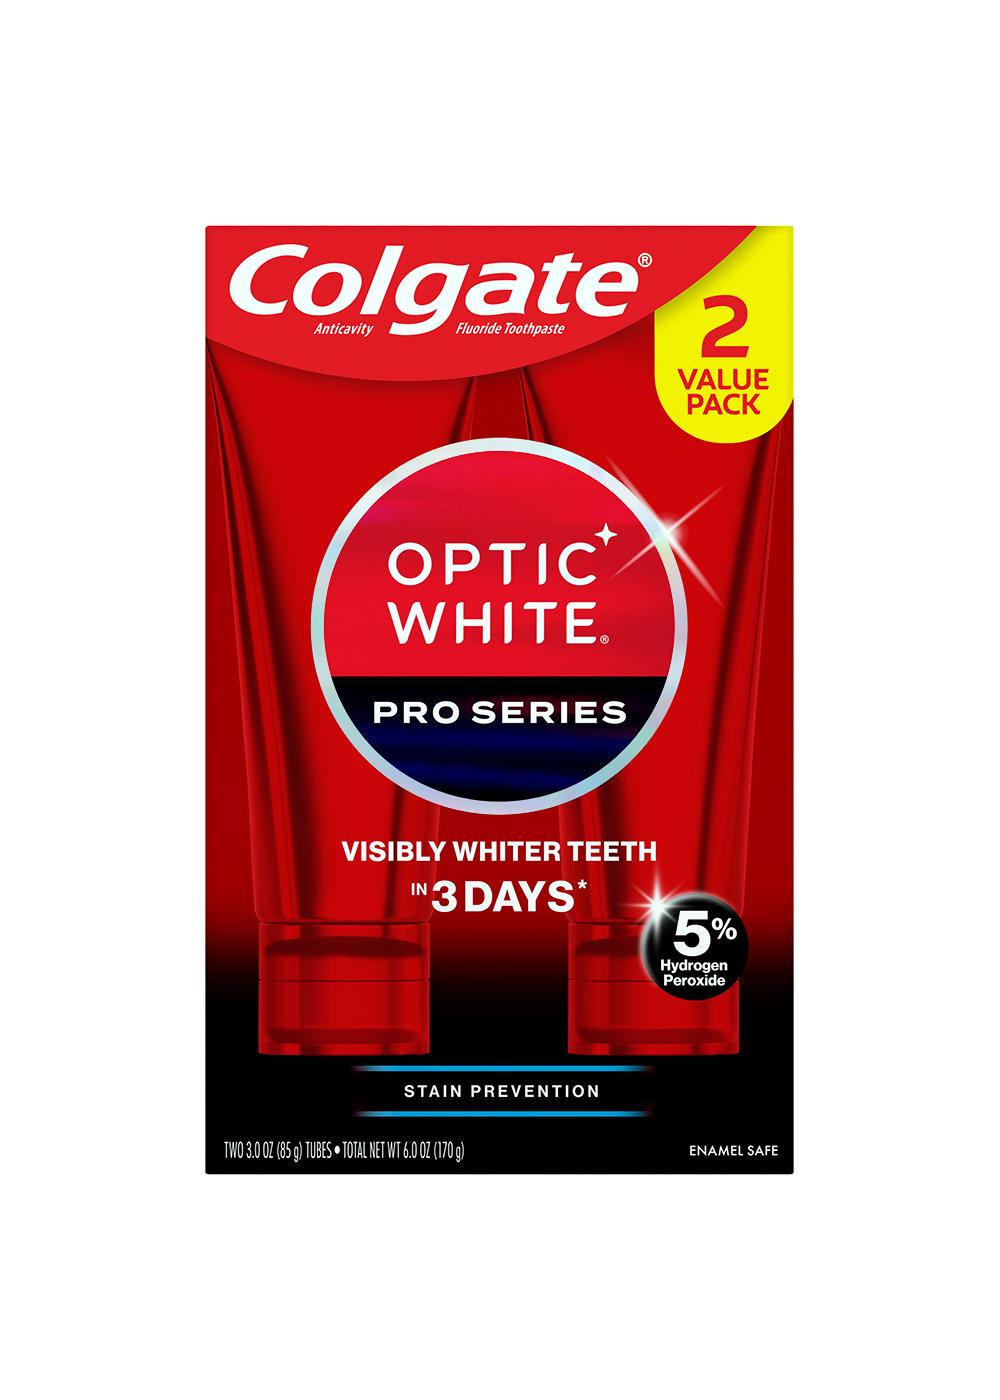 Colgate Optic White Pro Series Toothpaste - Stain Prevention ; image 1 of 2